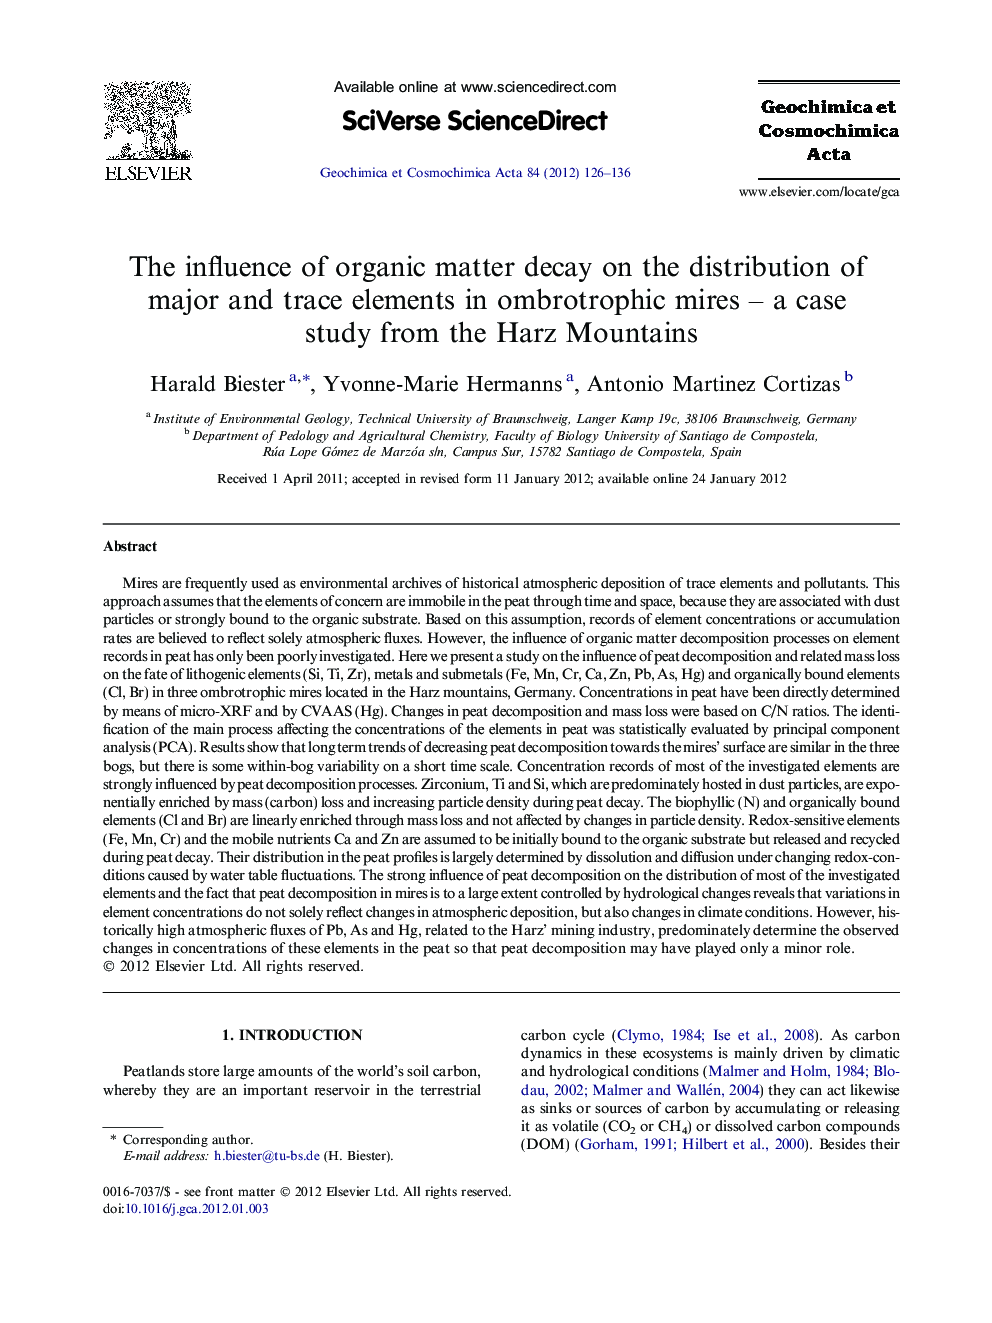 The influence of organic matter decay on the distribution of major and trace elements in ombrotrophic mires – a case study from the Harz Mountains